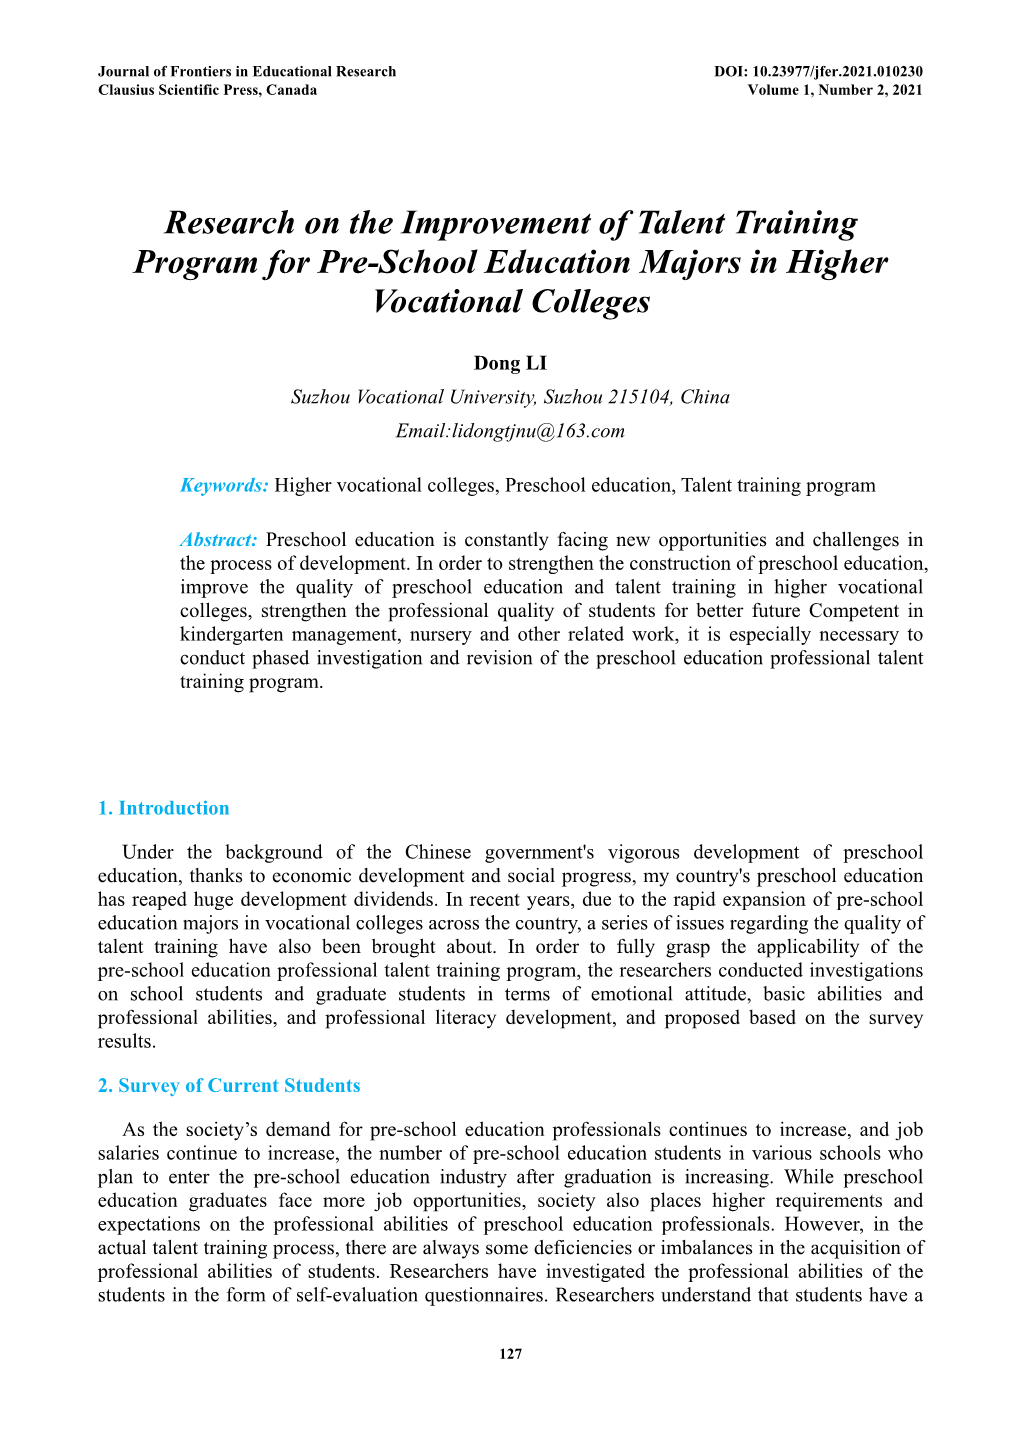 Research on the Improvement of Talent Training Program for Pre-School Education Majors in Higher Vocational Colleges